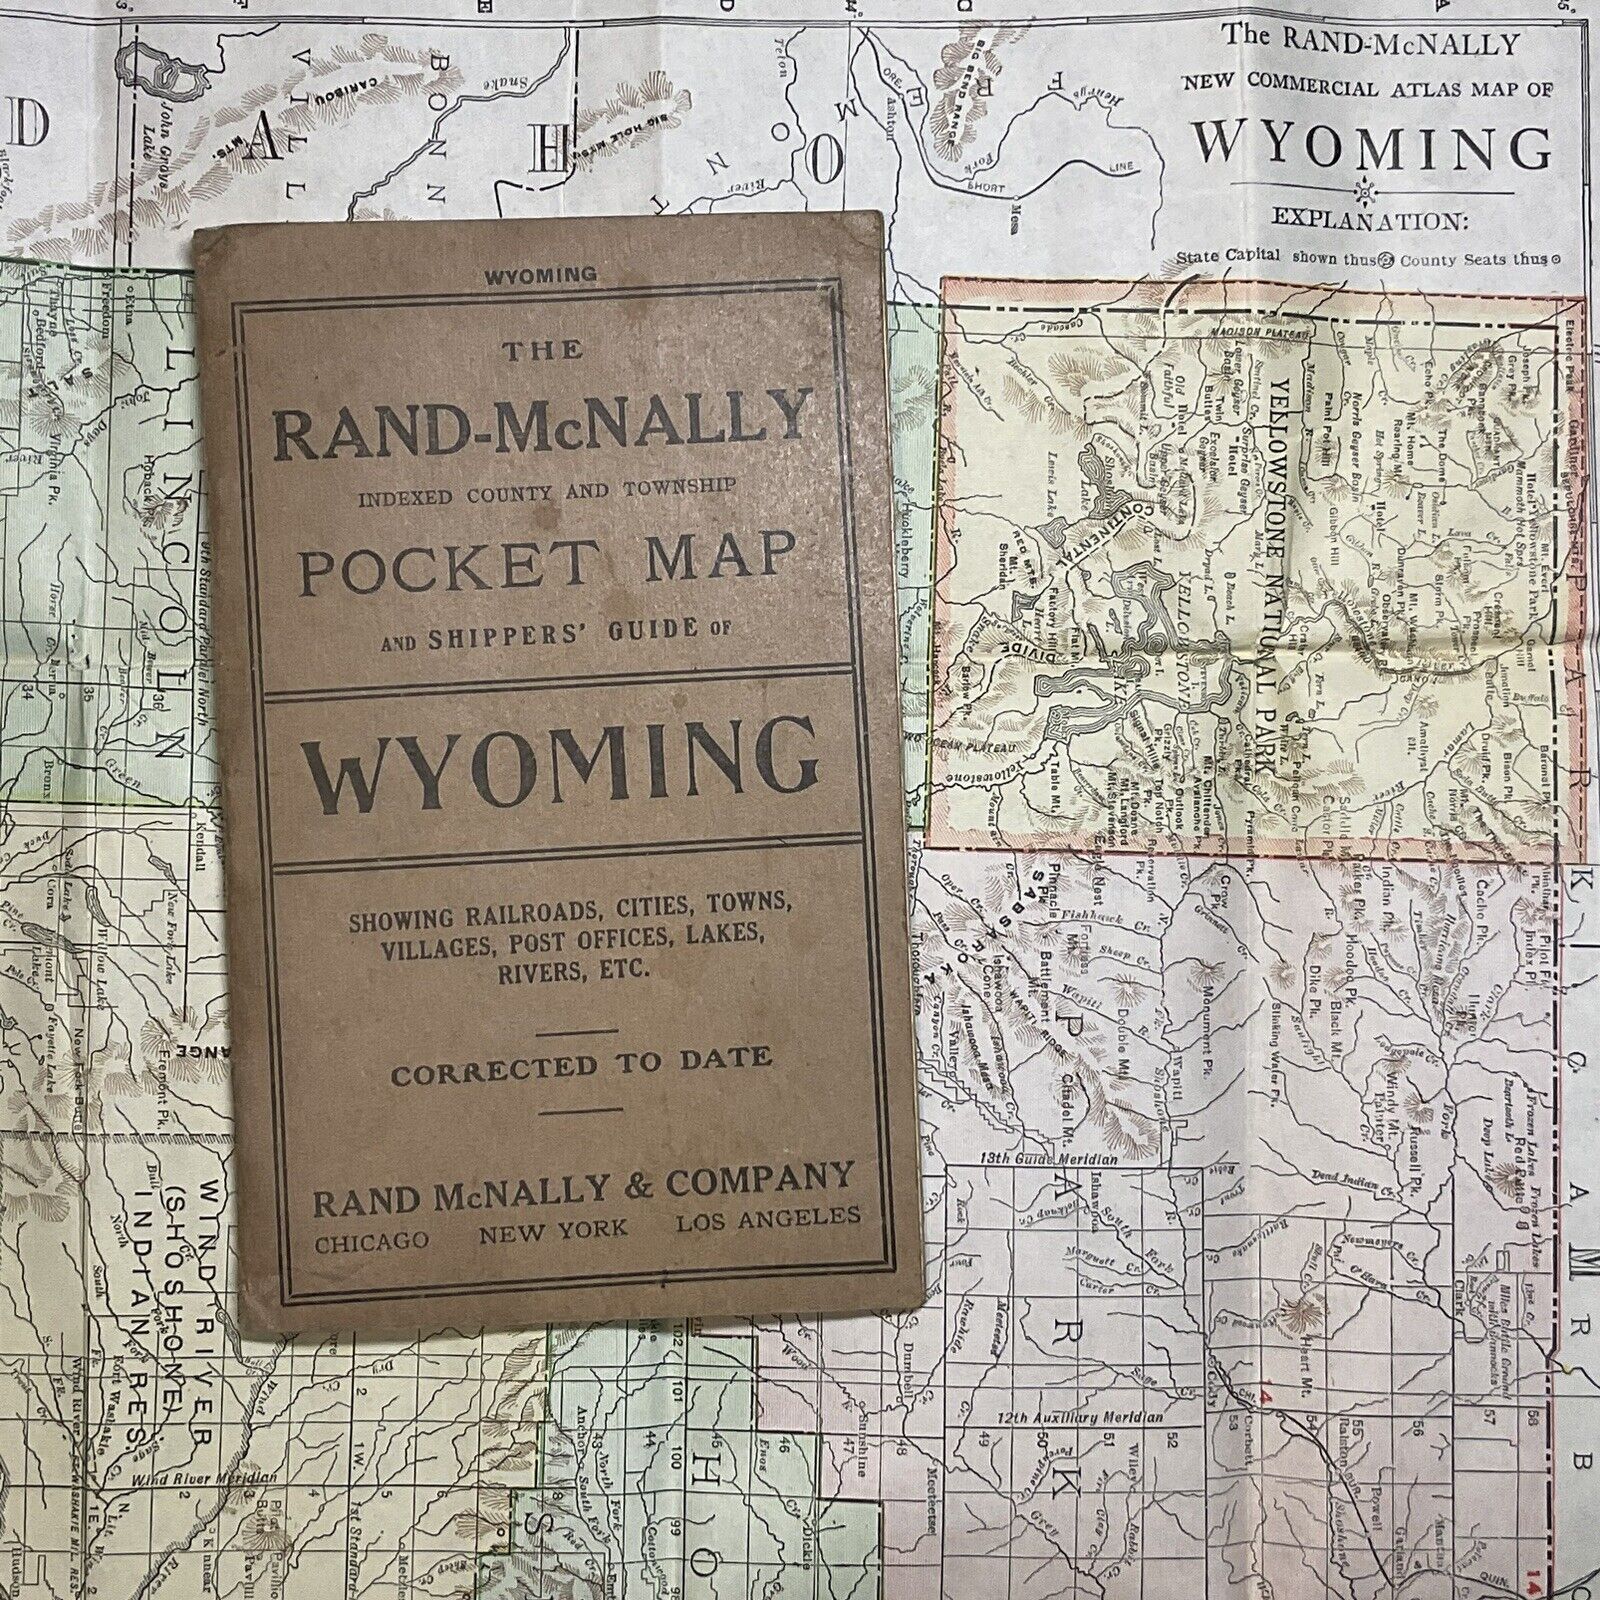 WYOMING- 1914 - RAND-McNALLY POCKET MAP & SHIPPERS\' GUIDE - 28”X21” VINTAGE MAP